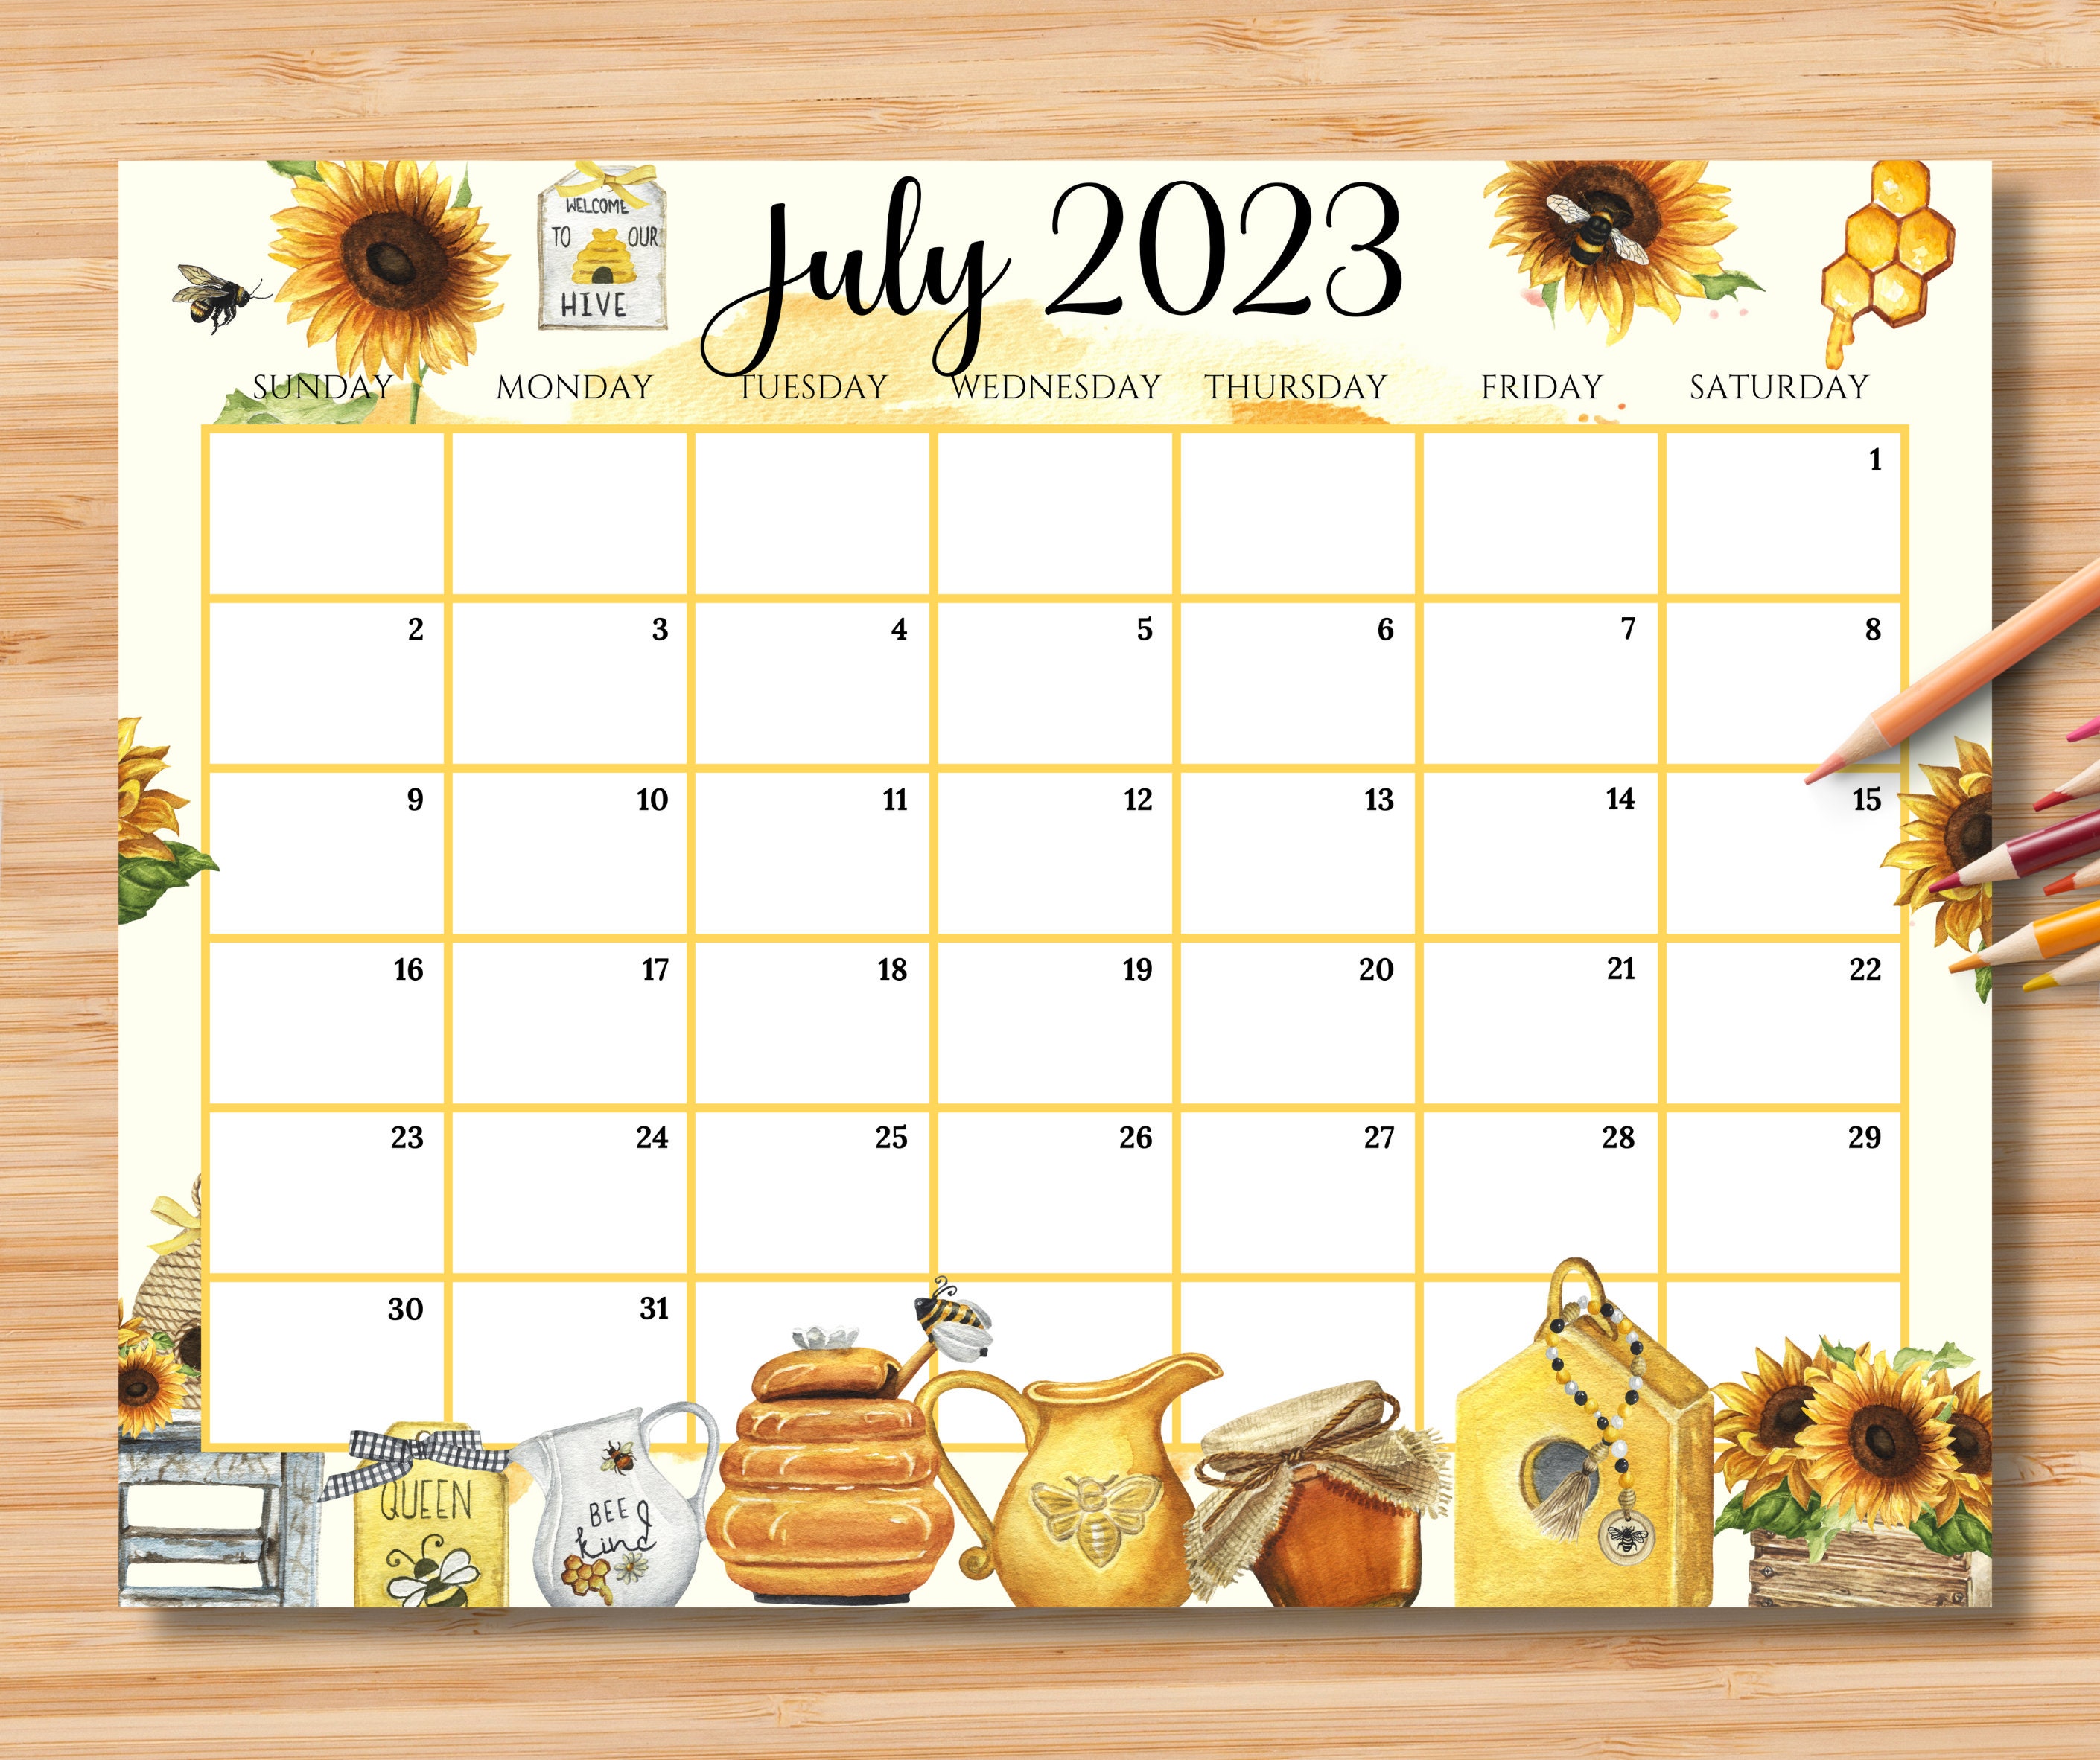 editable-july-2023-calendar-4th-july-independence-day-etsy-uk